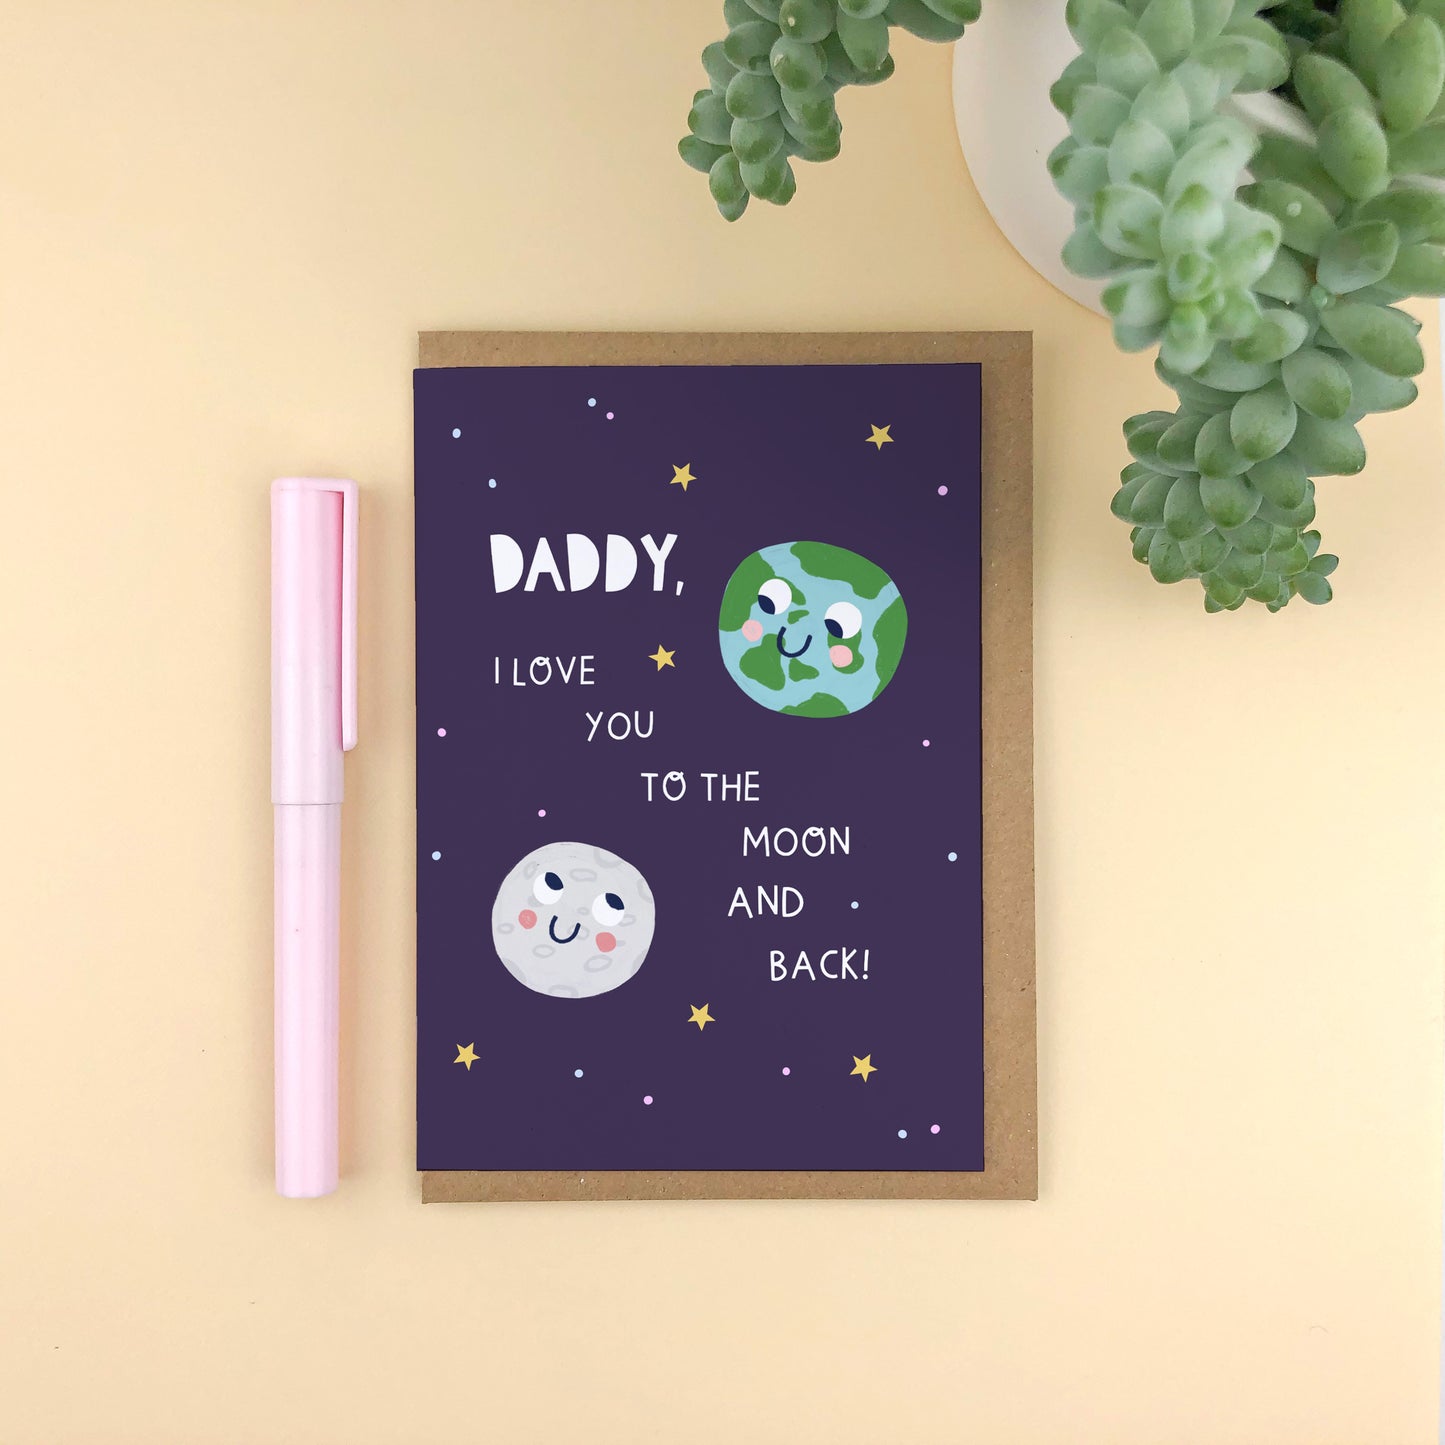 Daddy: I Love You To The Moon and Back. Father's Day Card.